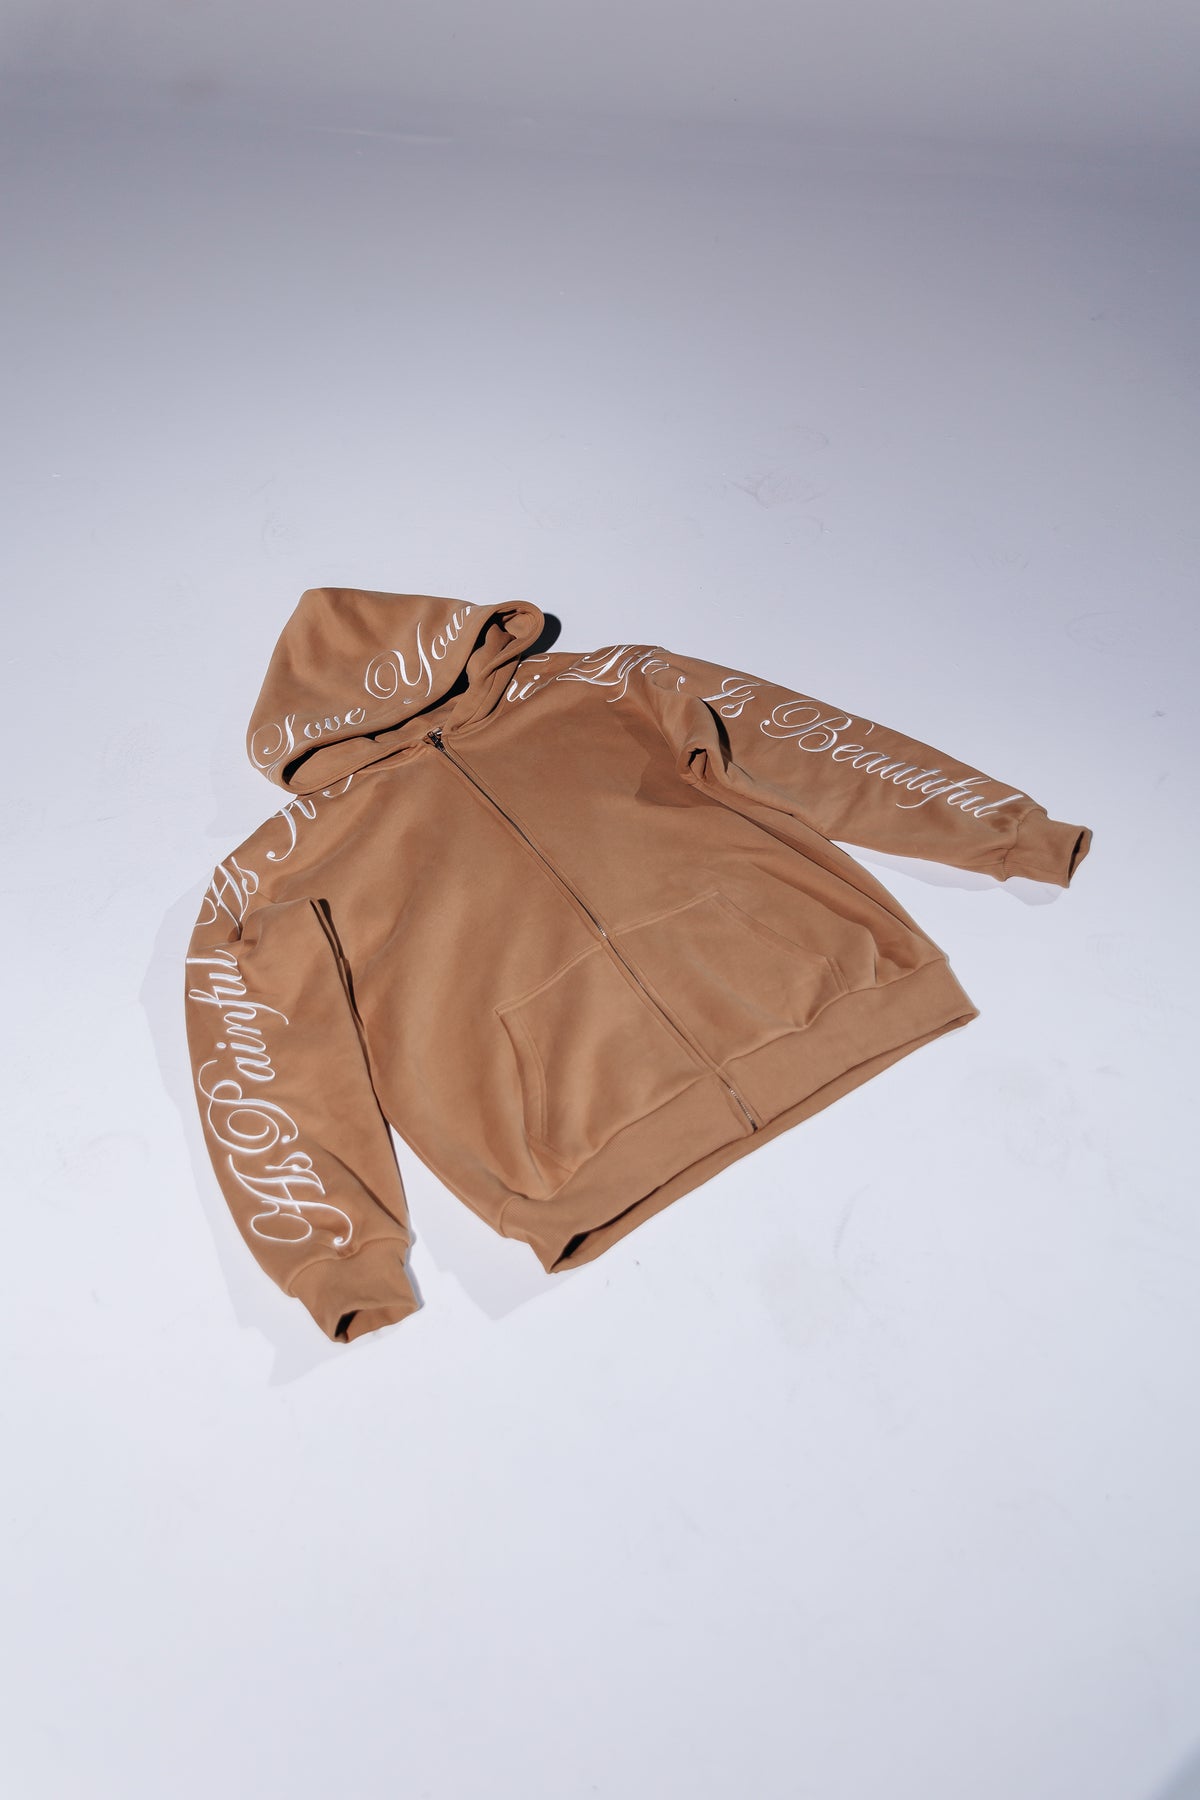 LOVE YOURSELF EMBROIDERED ZIP-UP - MOCHA